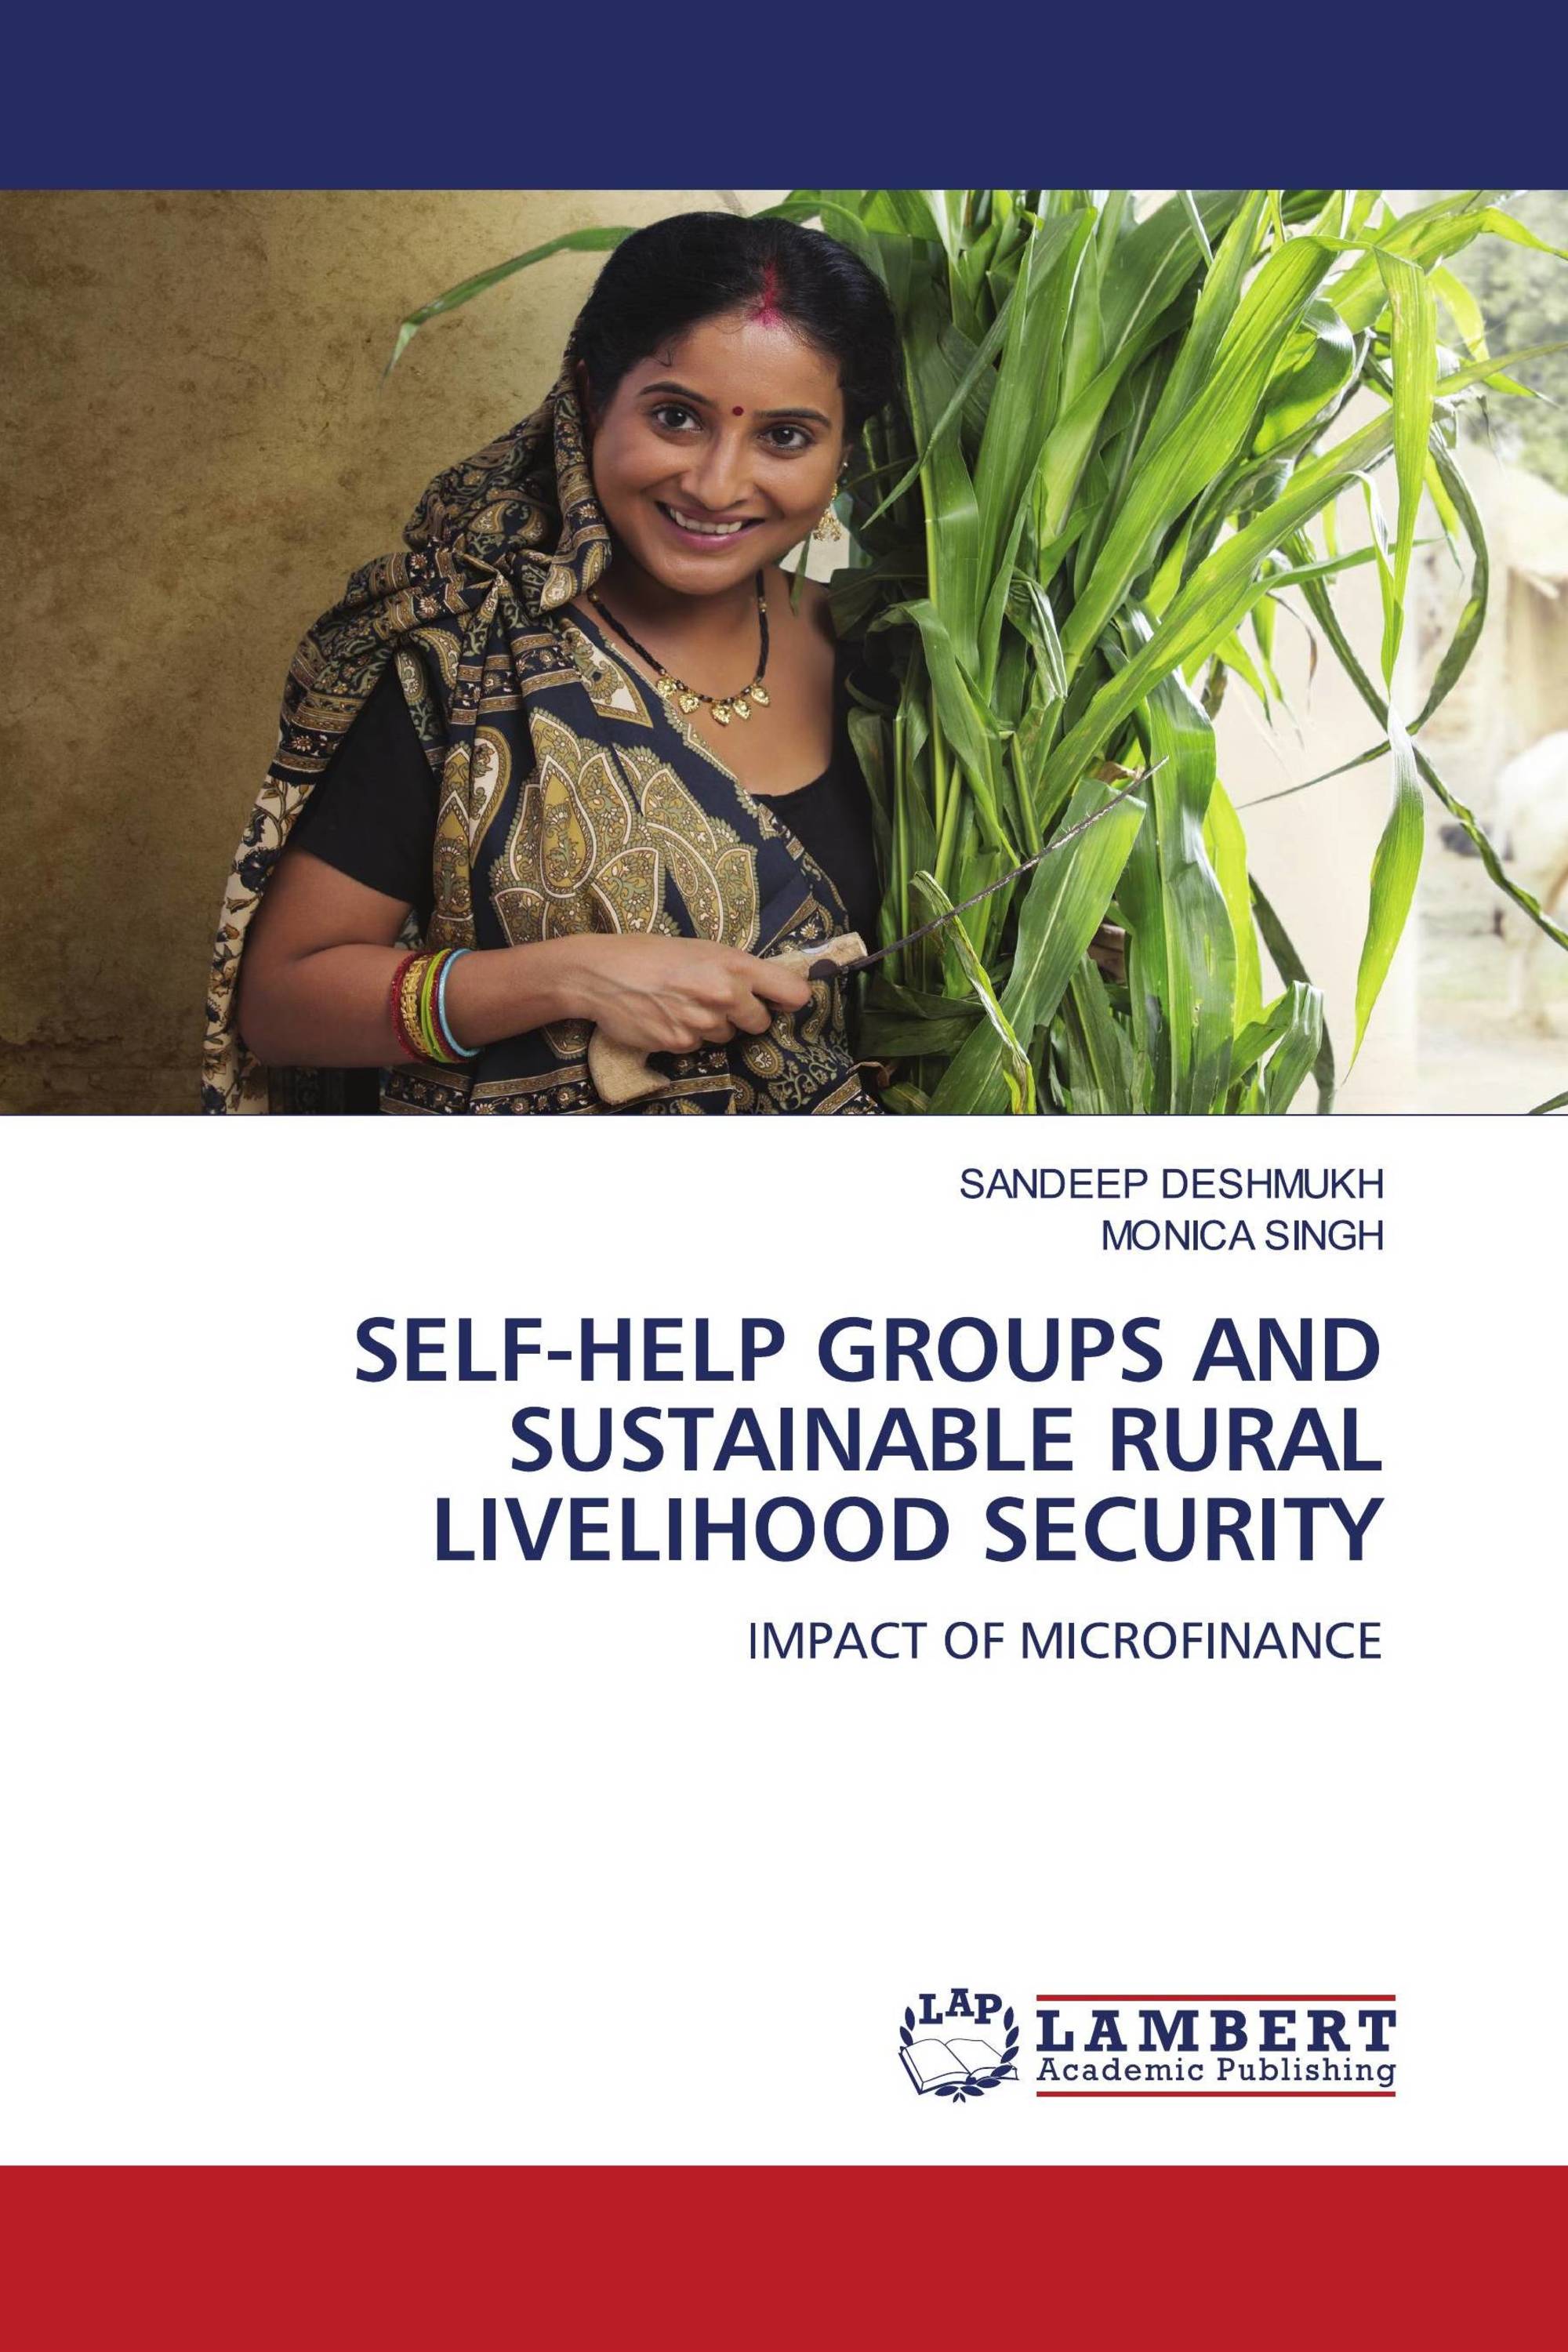 SELF-HELP GROUPS AND SUSTAINABLE RURAL LIVELIHOOD SECURITY